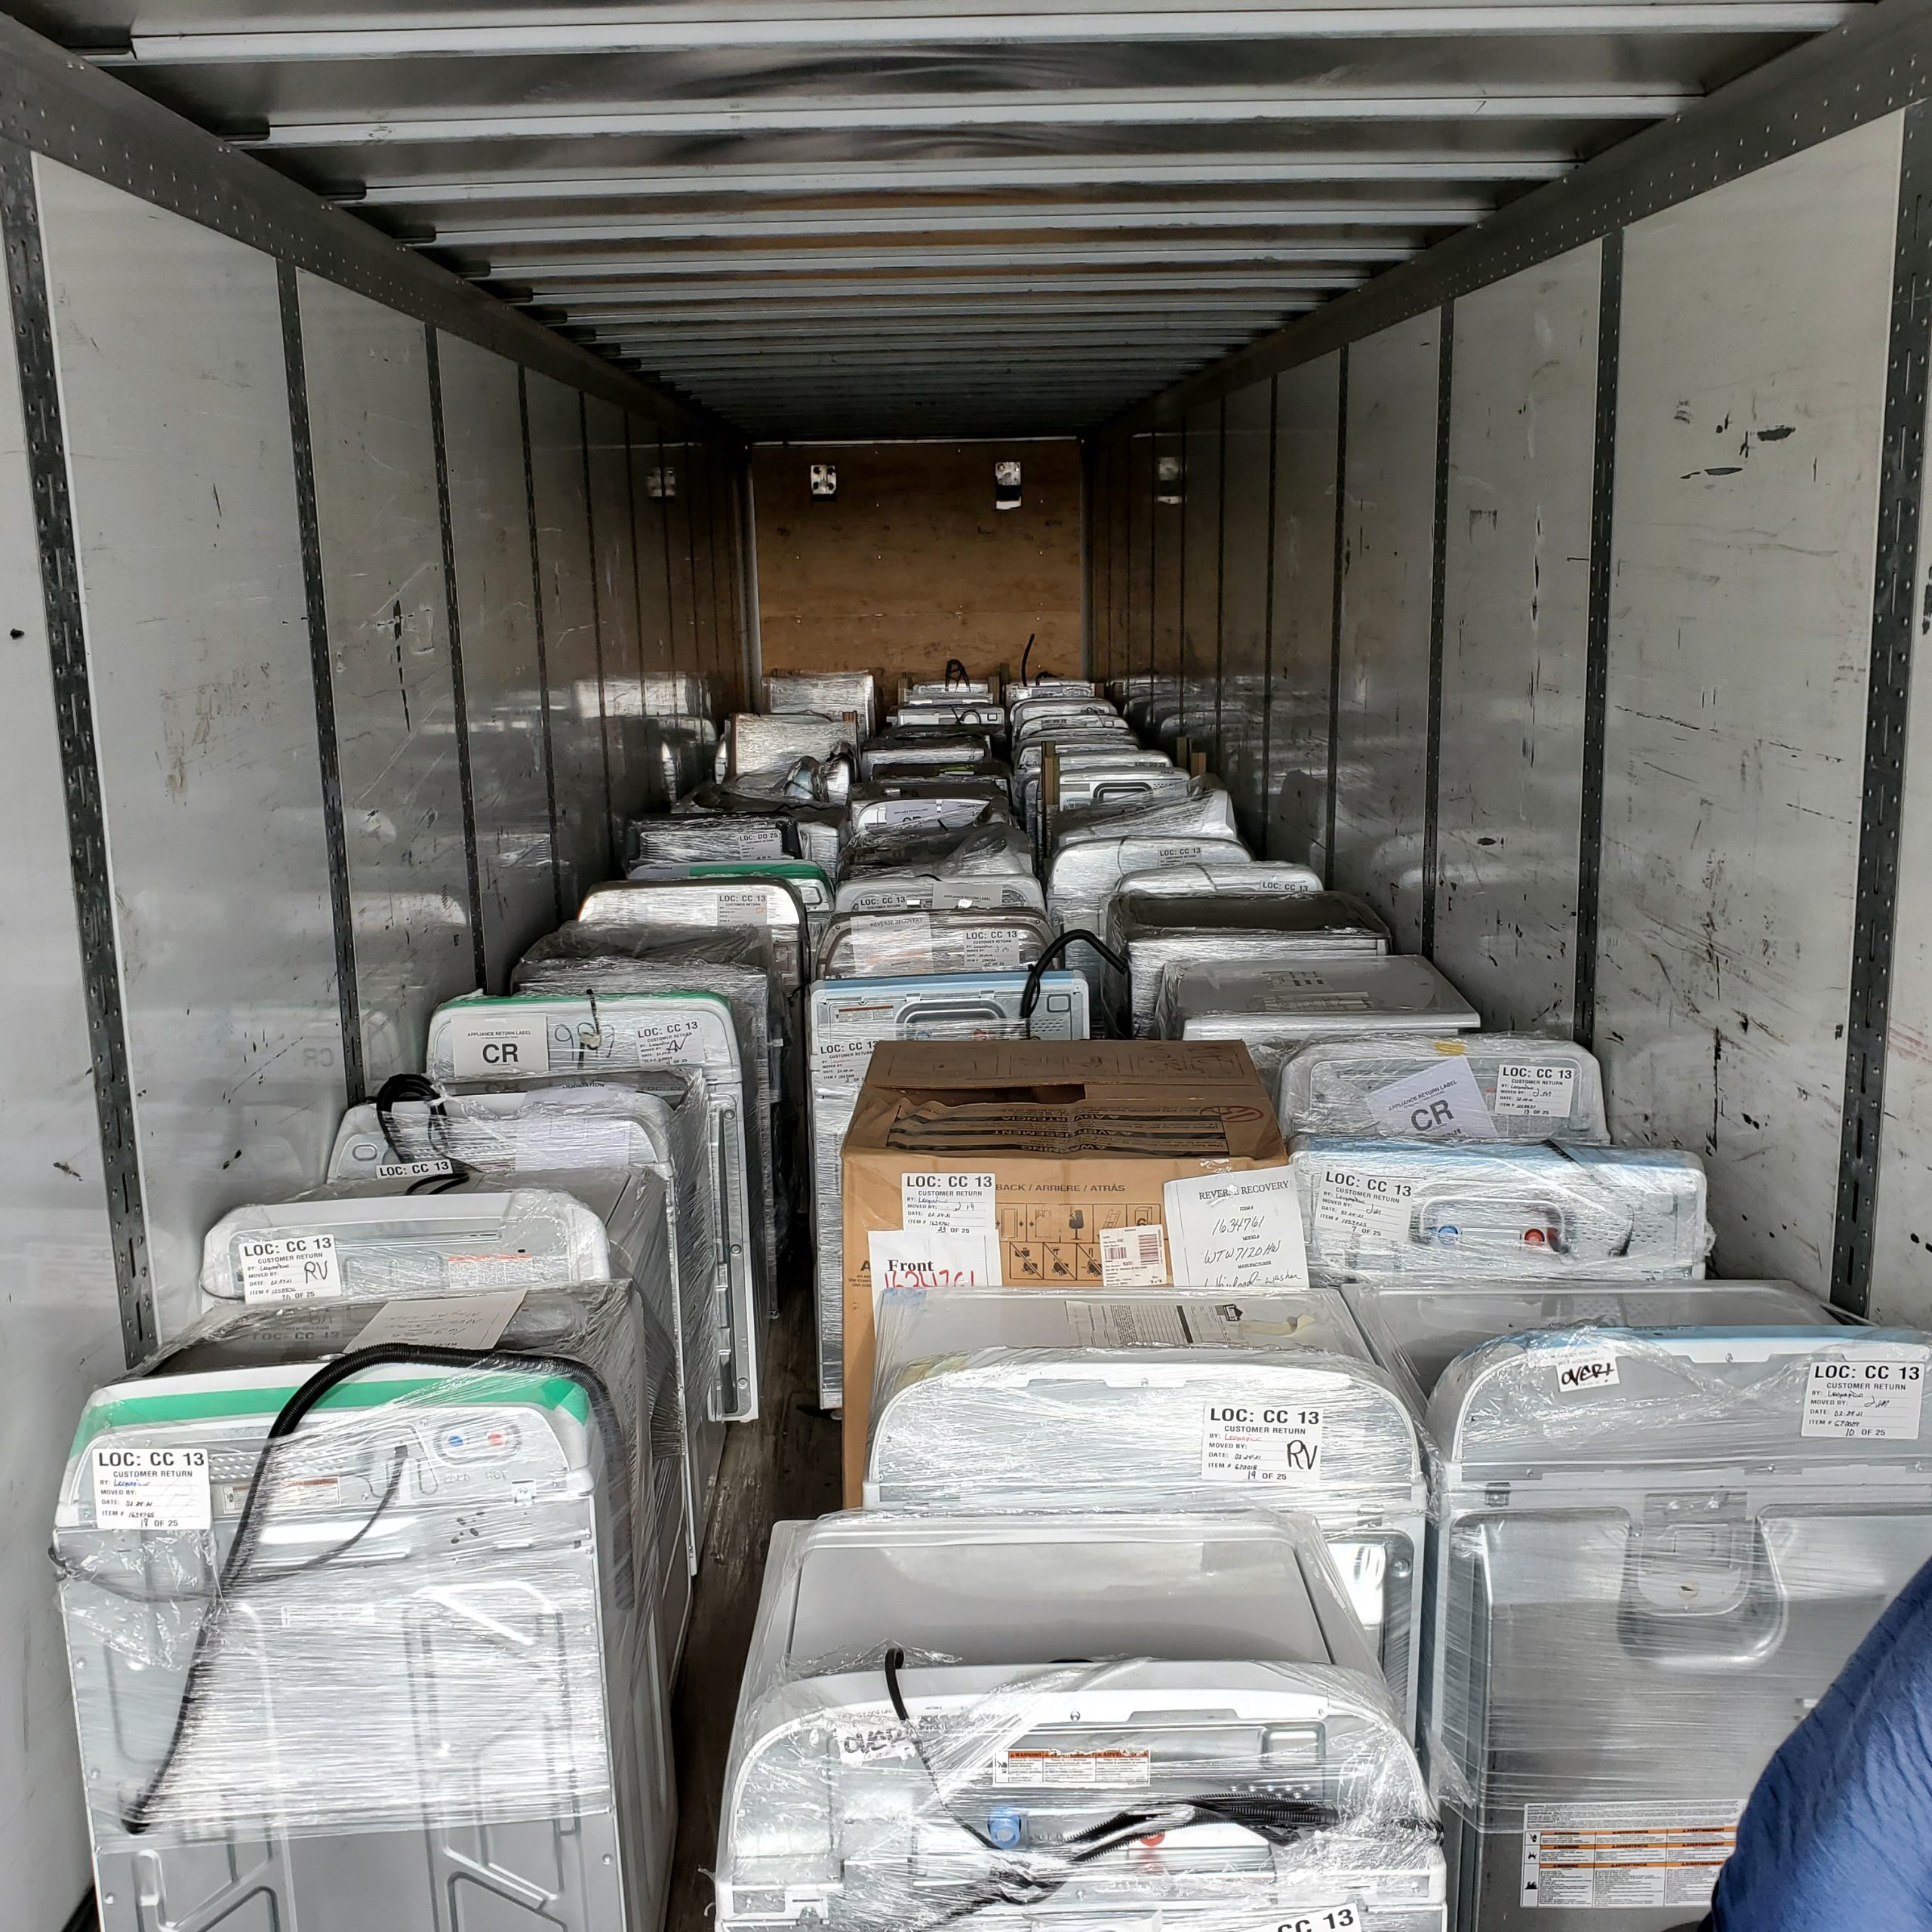 pictures of Another Example truckload from the Lowes customer return appliance program